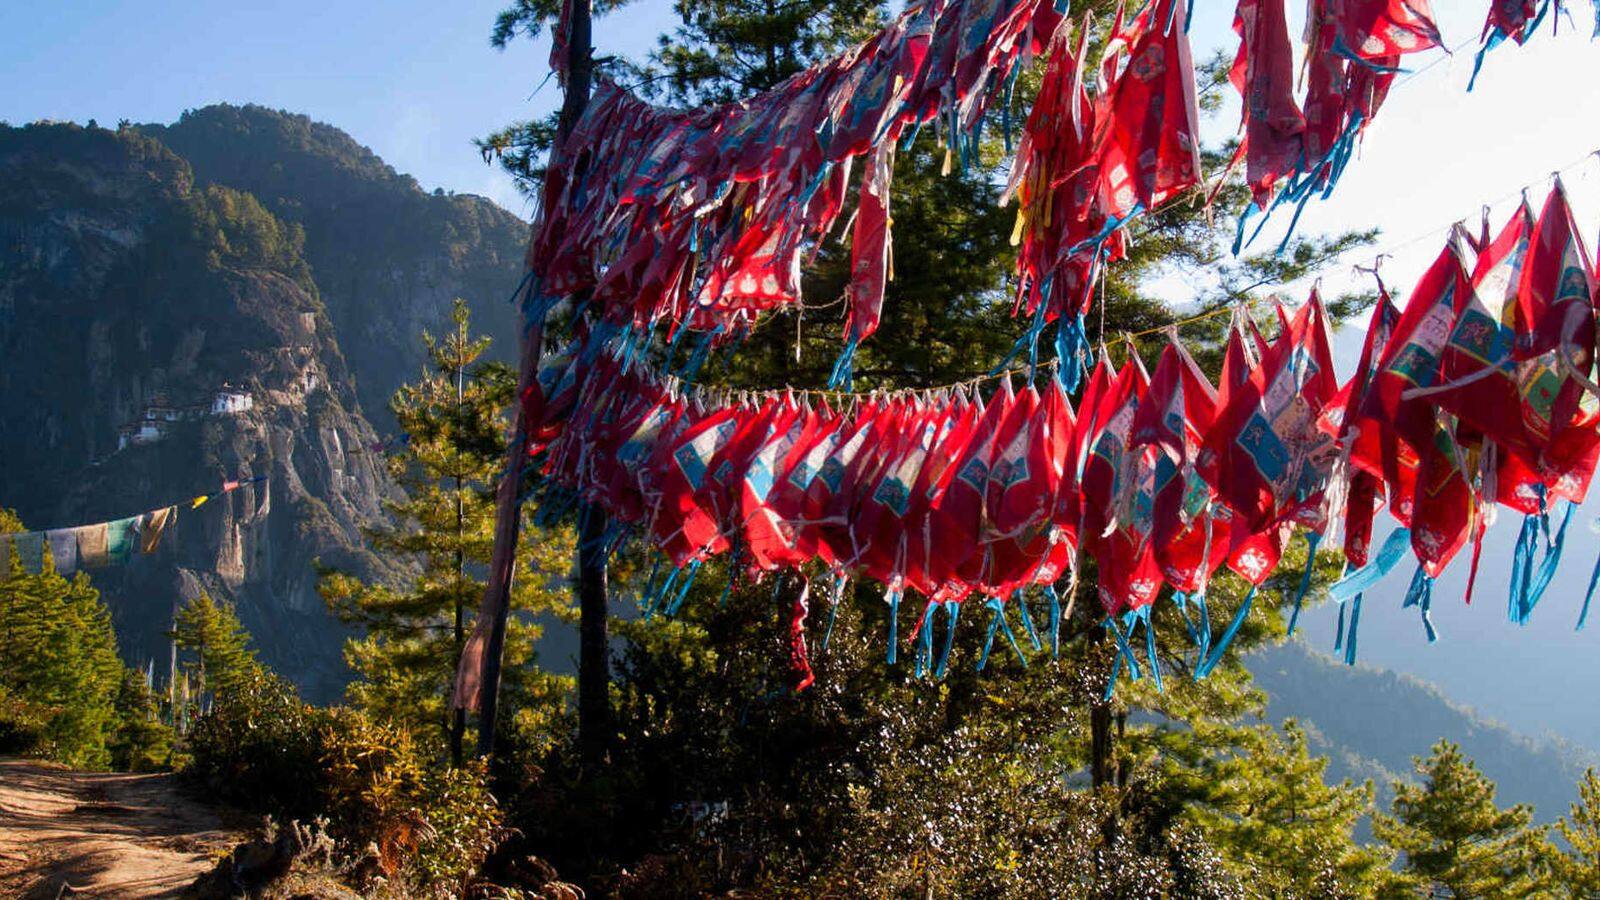 Trek Bhutan's Druk Path: Things to watch out for